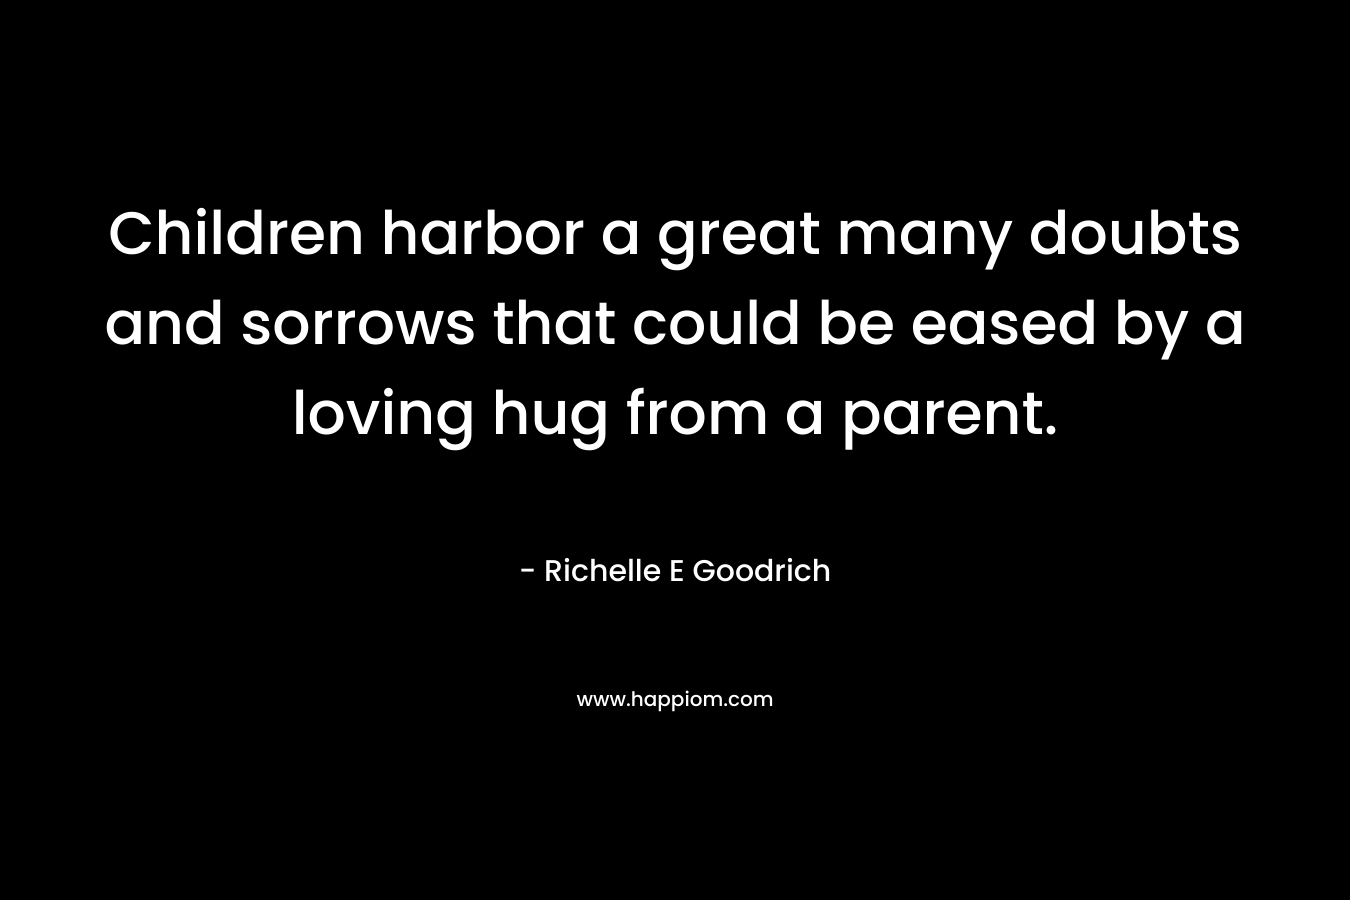 Children harbor a great many doubts and sorrows that could be eased by a loving hug from a parent. – Richelle E Goodrich